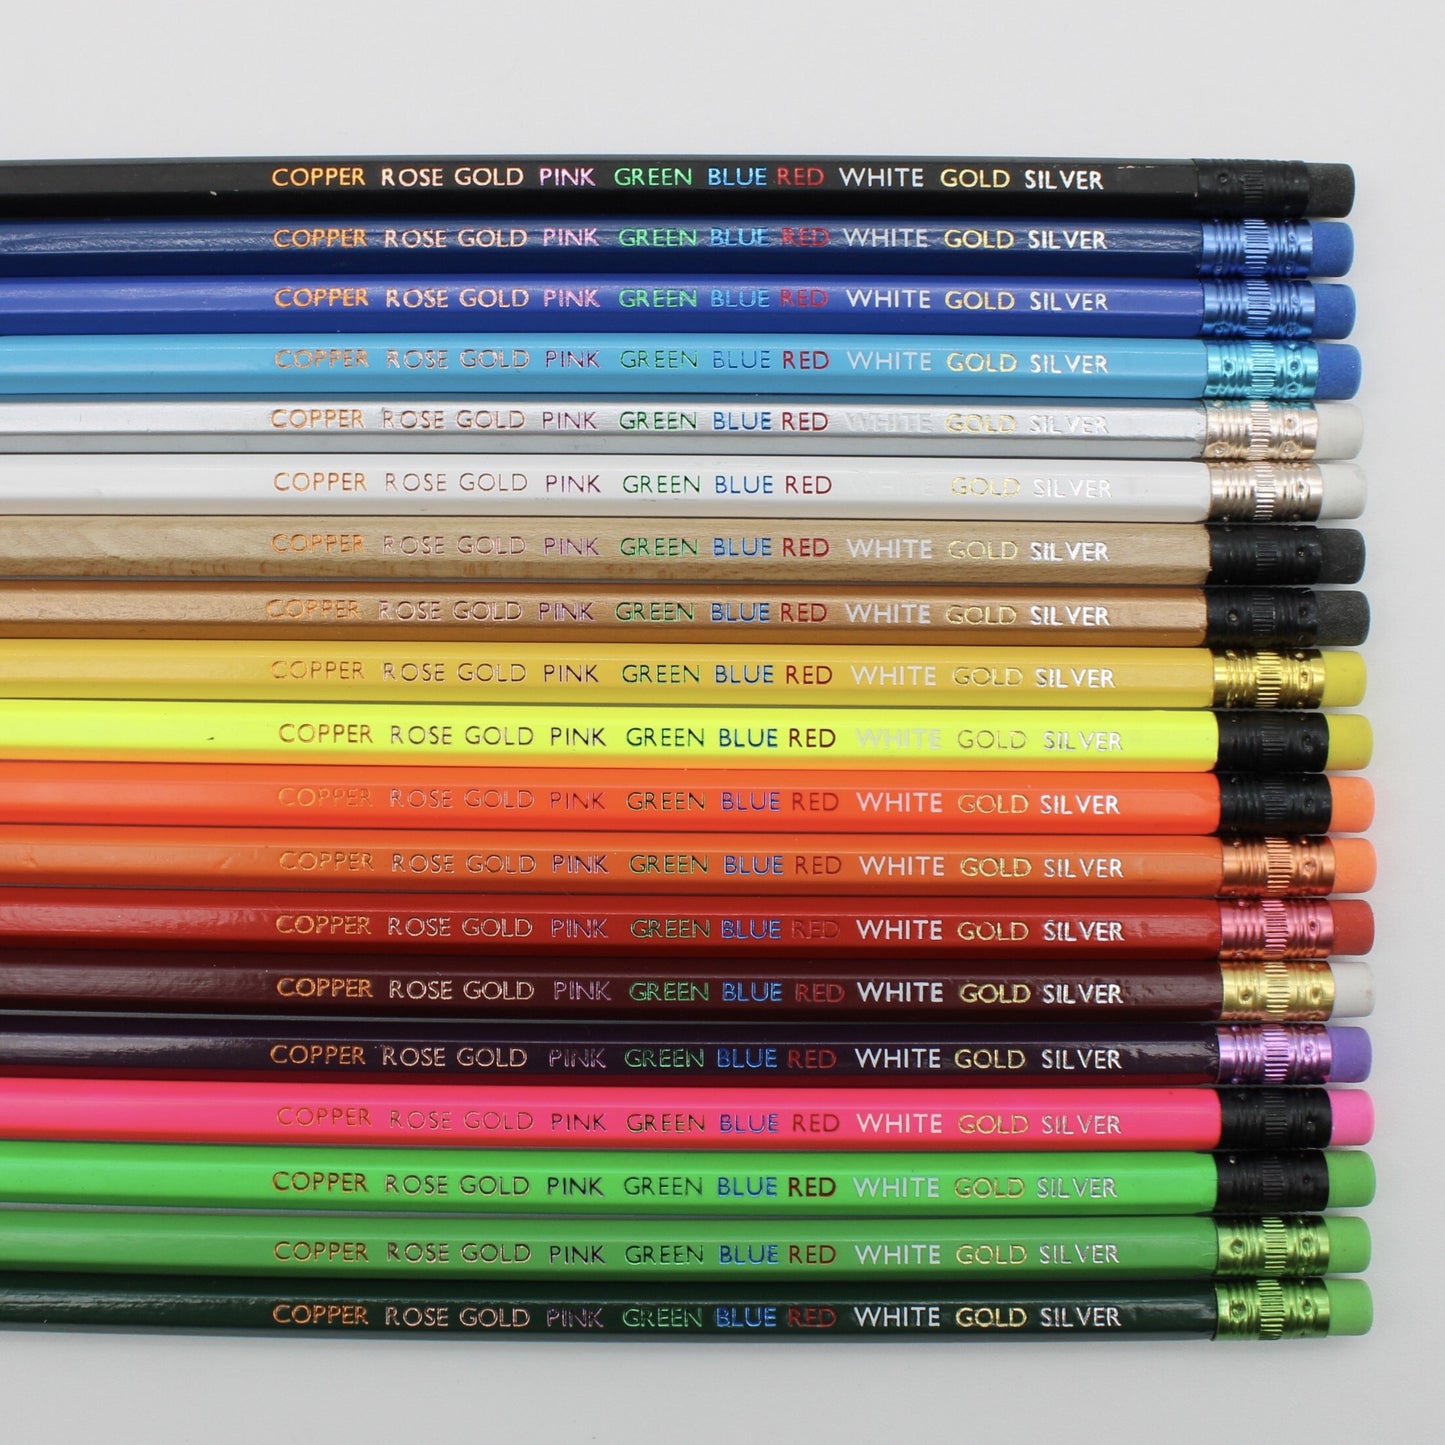 Personalised boxed set of 4 pencils - Same Phrase